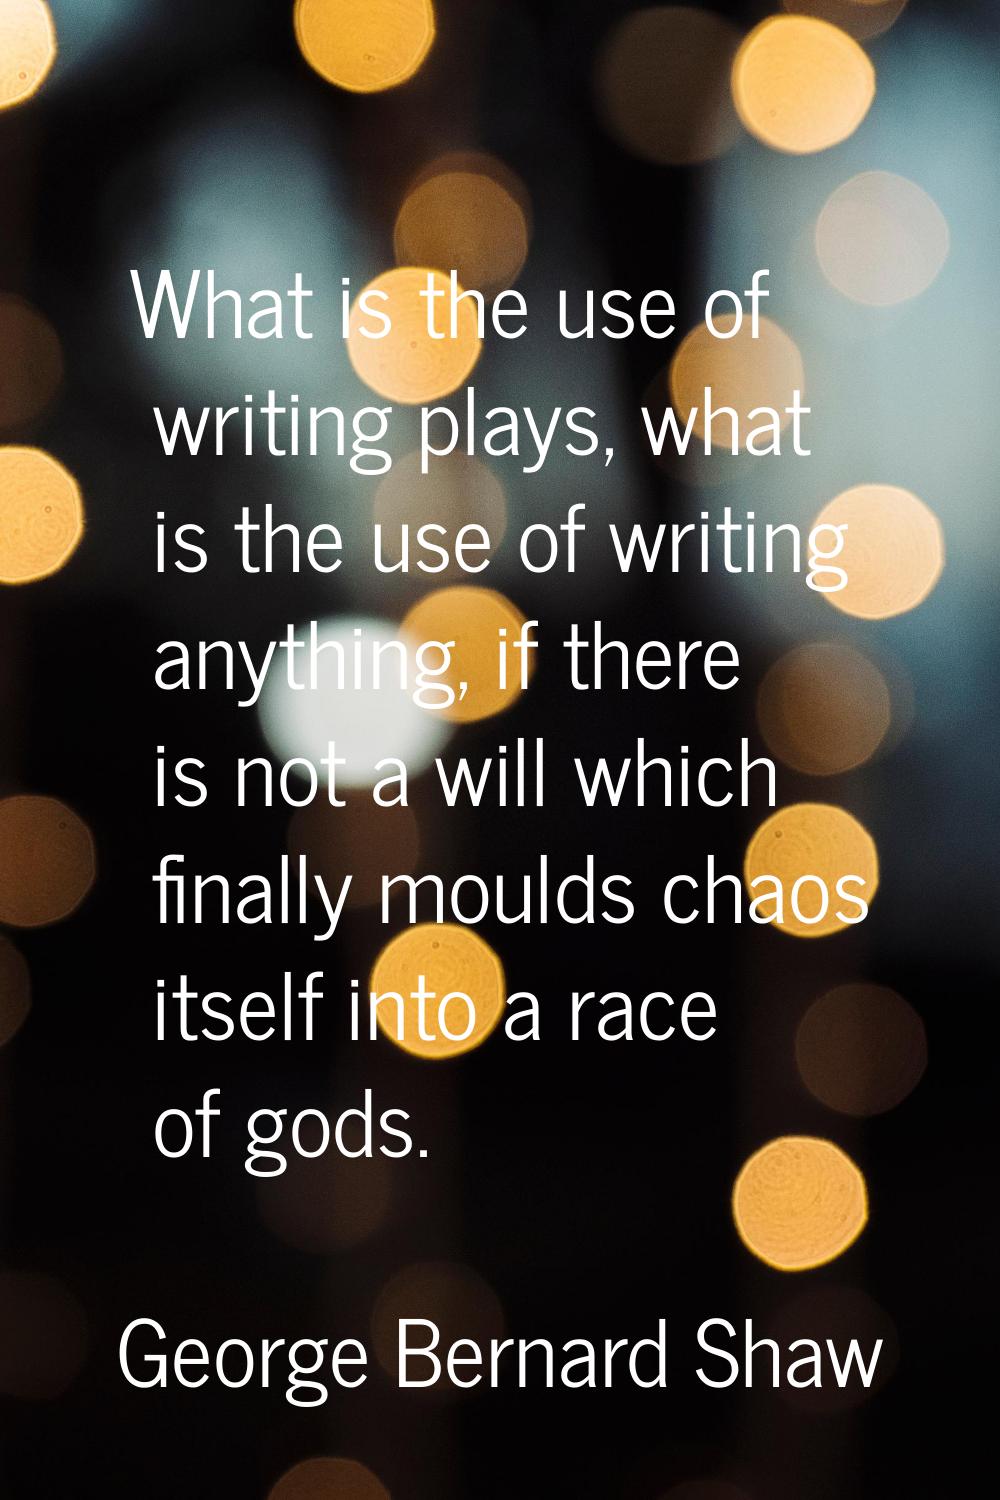 What is the use of writing plays, what is the use of writing anything, if there is not a will which